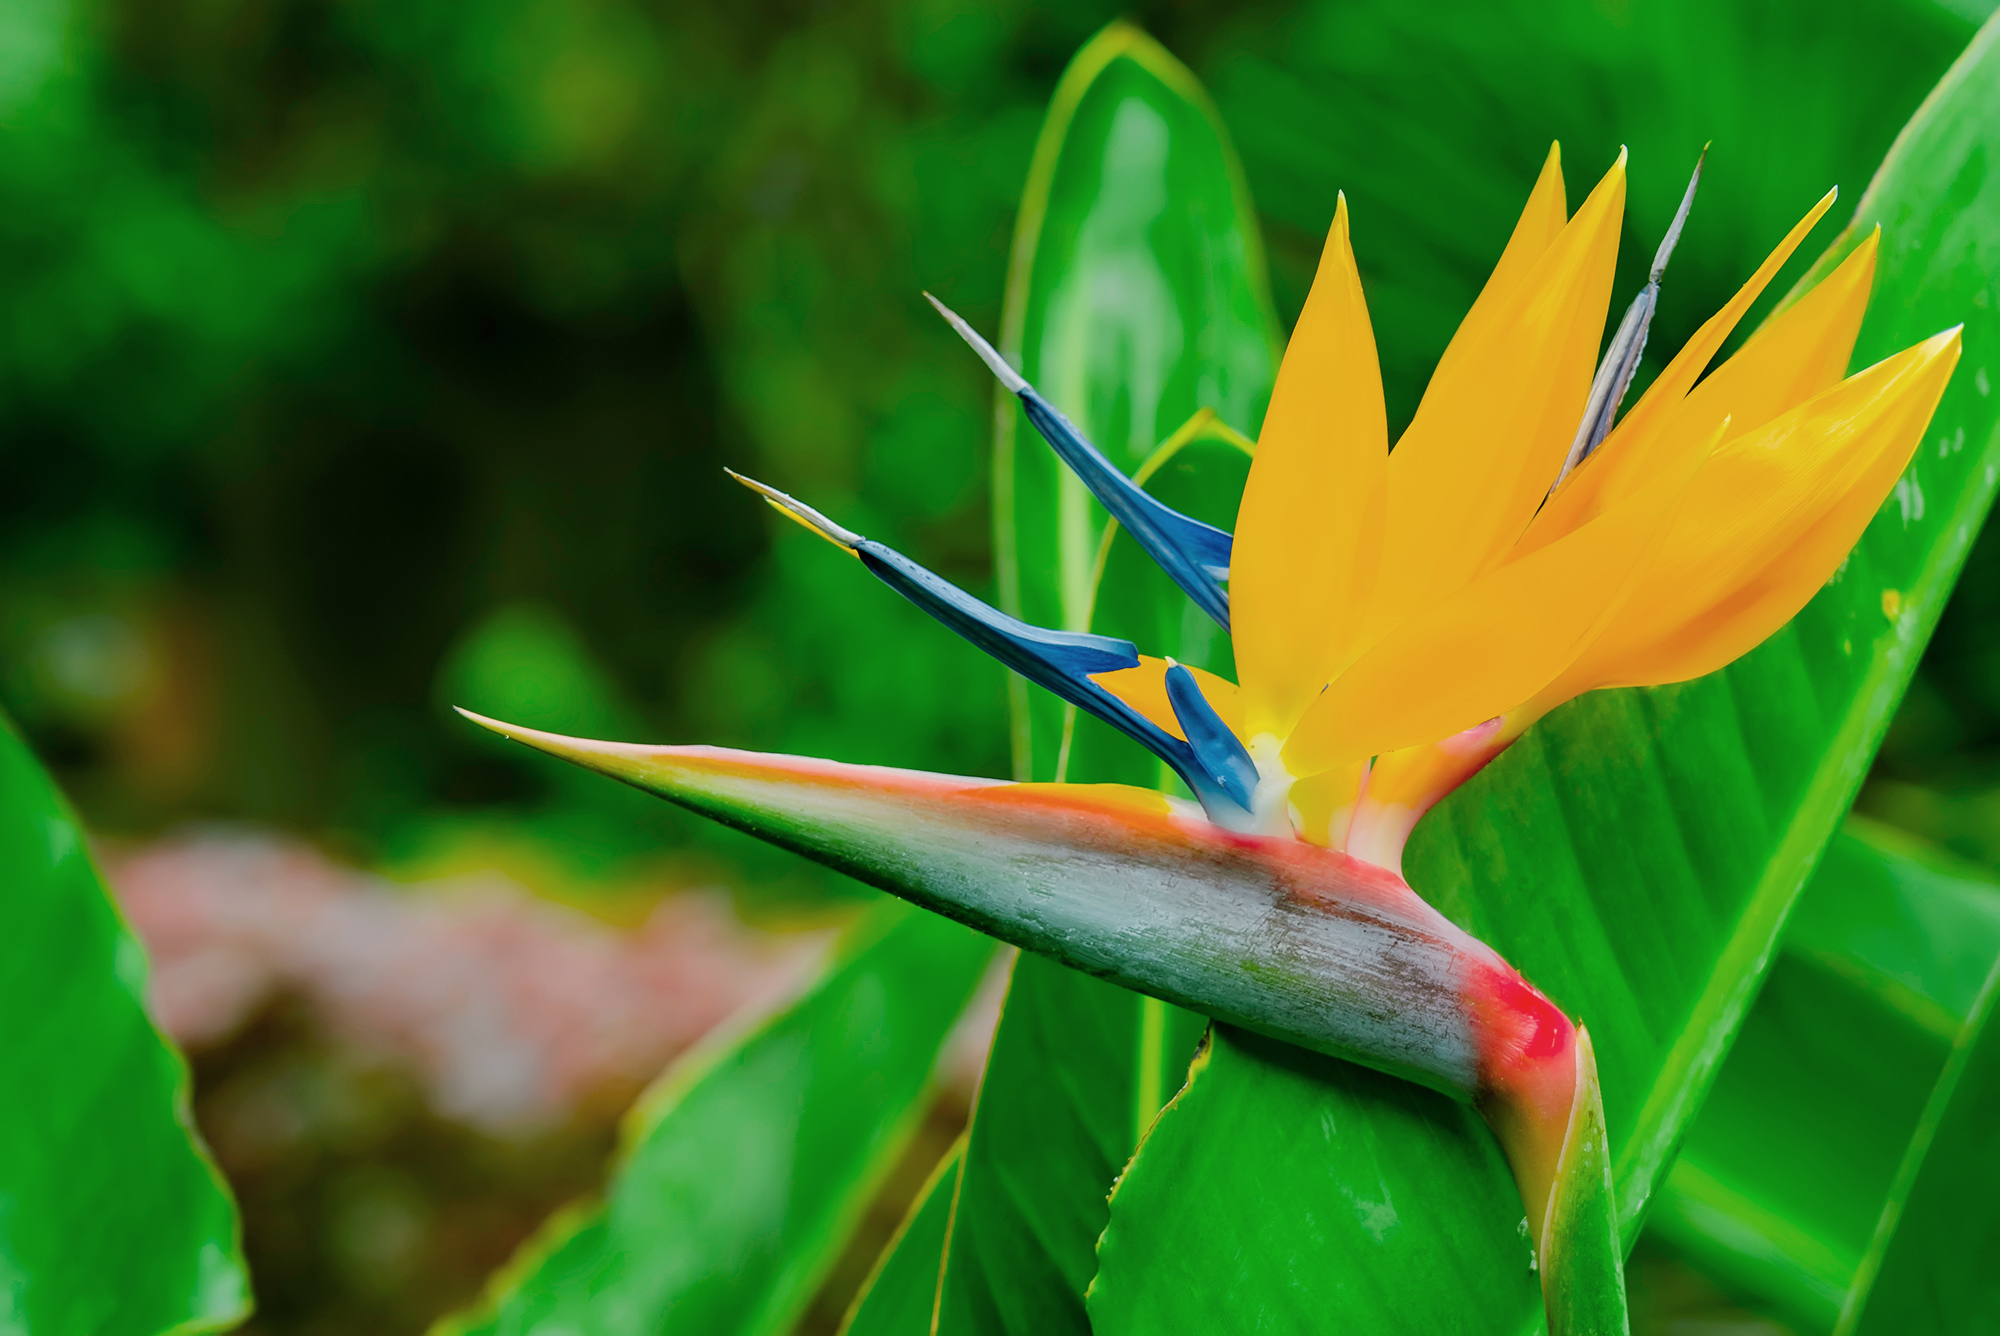 Strelitzia Reginae. Beautiful Bird of Paradise flower on the background of green leaves in soft focus. Tropical flower on Tenerife, Canary Islands, Spain